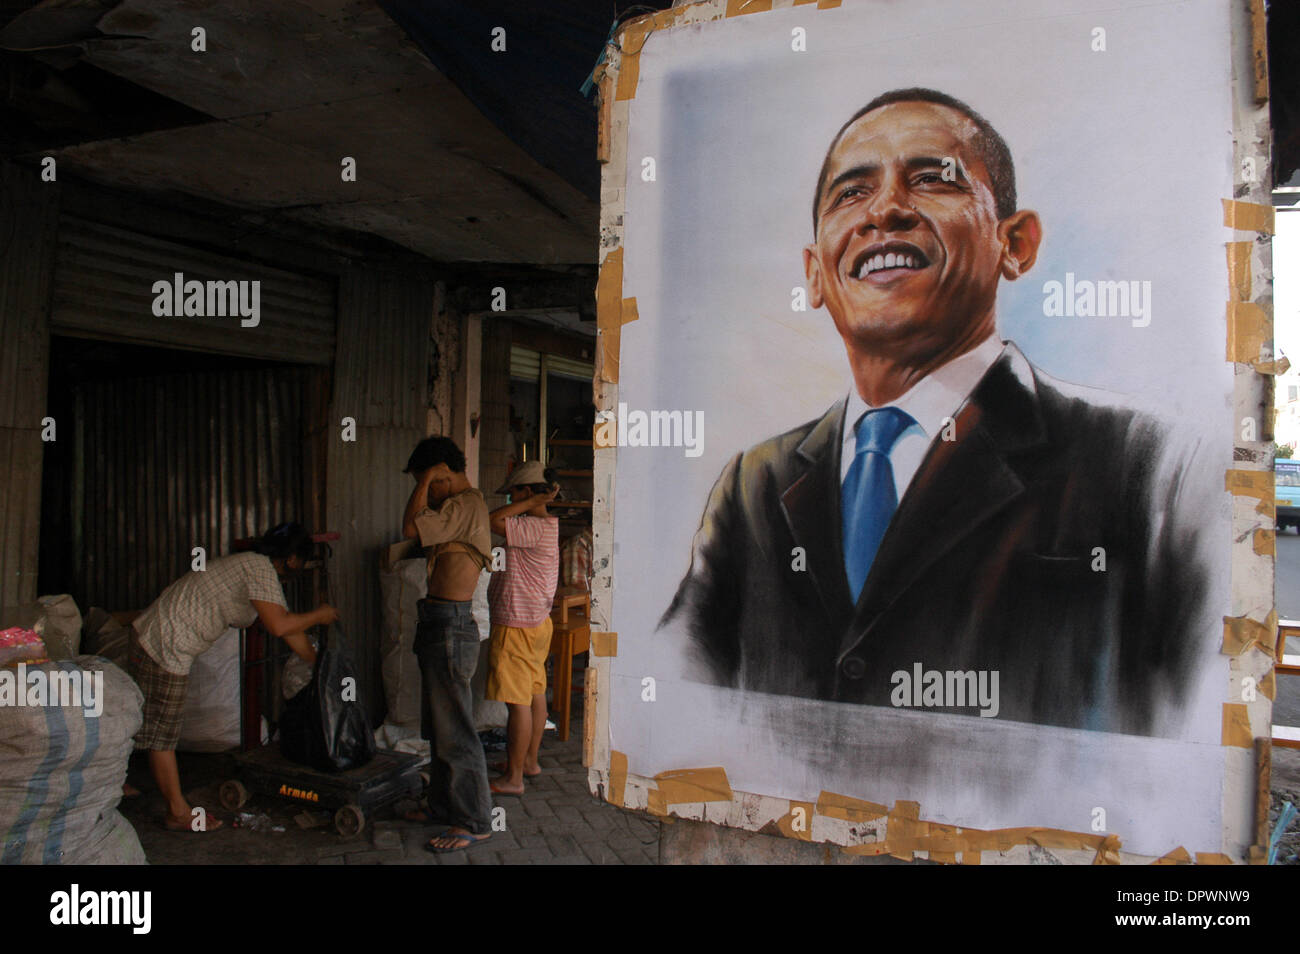 Jan 20, 2009 - Jakarta, Indonesia - A street painter paints a picture of US President Barack Hussein Obama at a vendor in Jakarta, Indonesia, January 20.2009. Barack Hussein Obama claimed his place in history as America's first black president, summoning a dispirited nation to unite in hope against the 'gathering clouds and raging storms' of war and economic woe. (Credit Image: © J Stock Photo